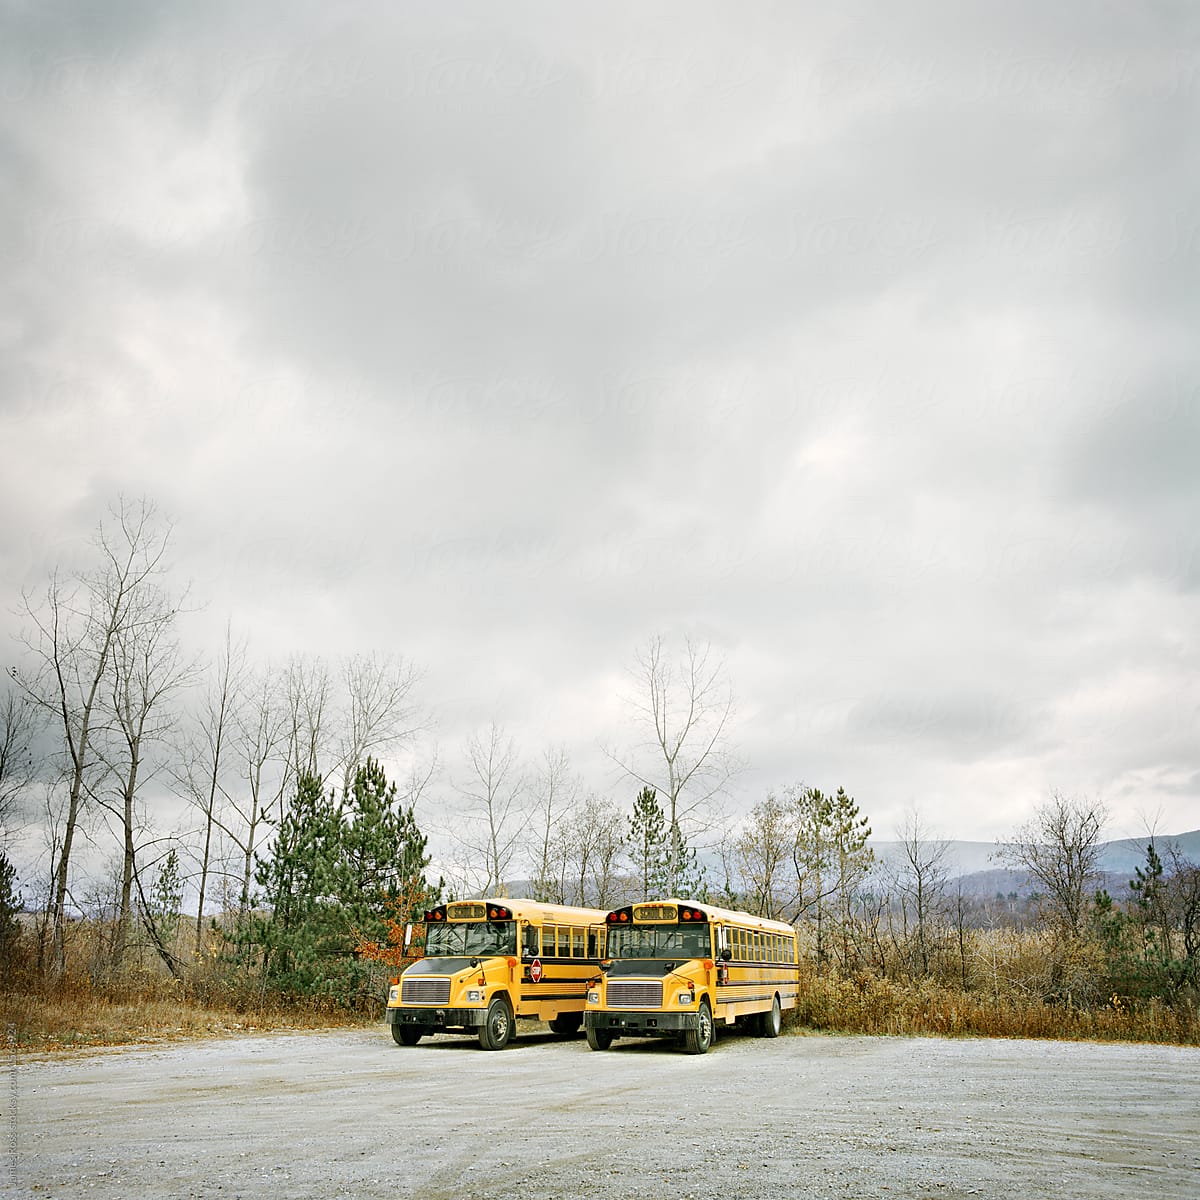 Two School Buses